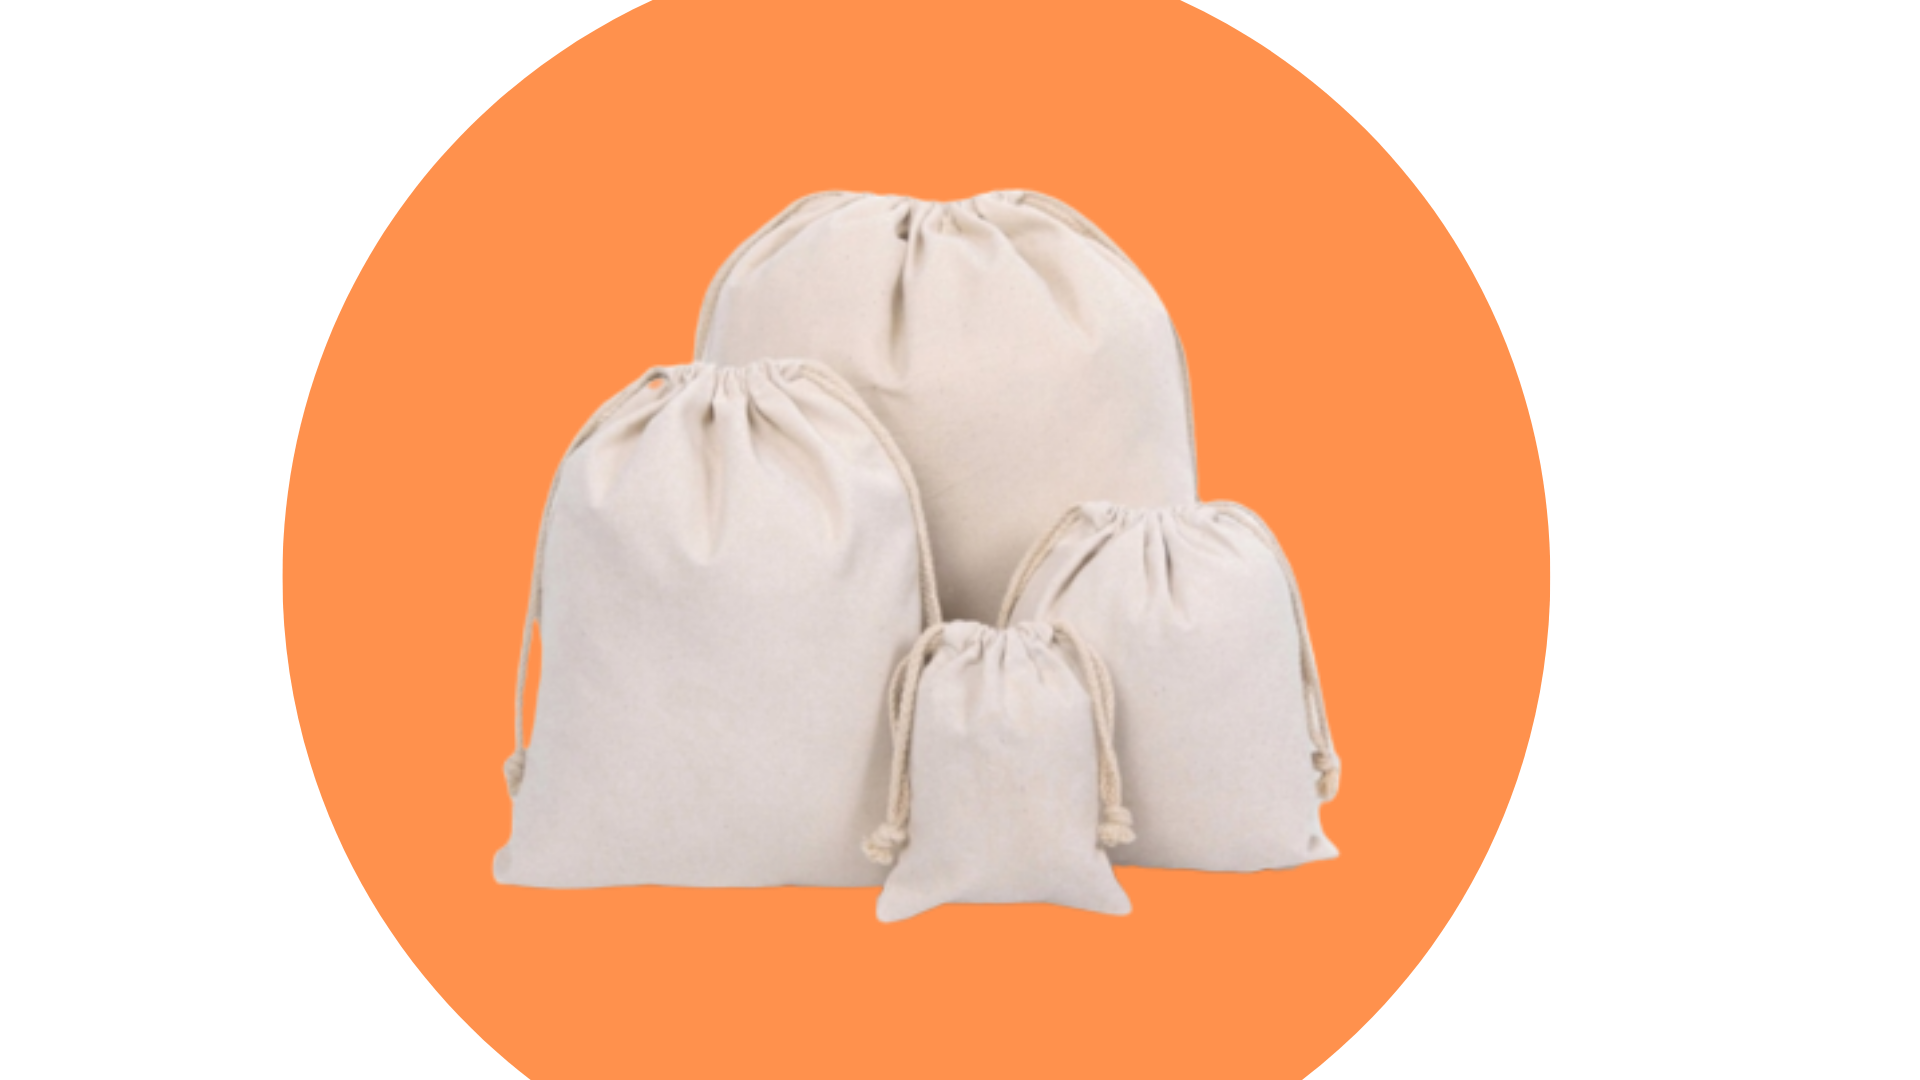 What is Cloth Pouch Bag? What are its features?